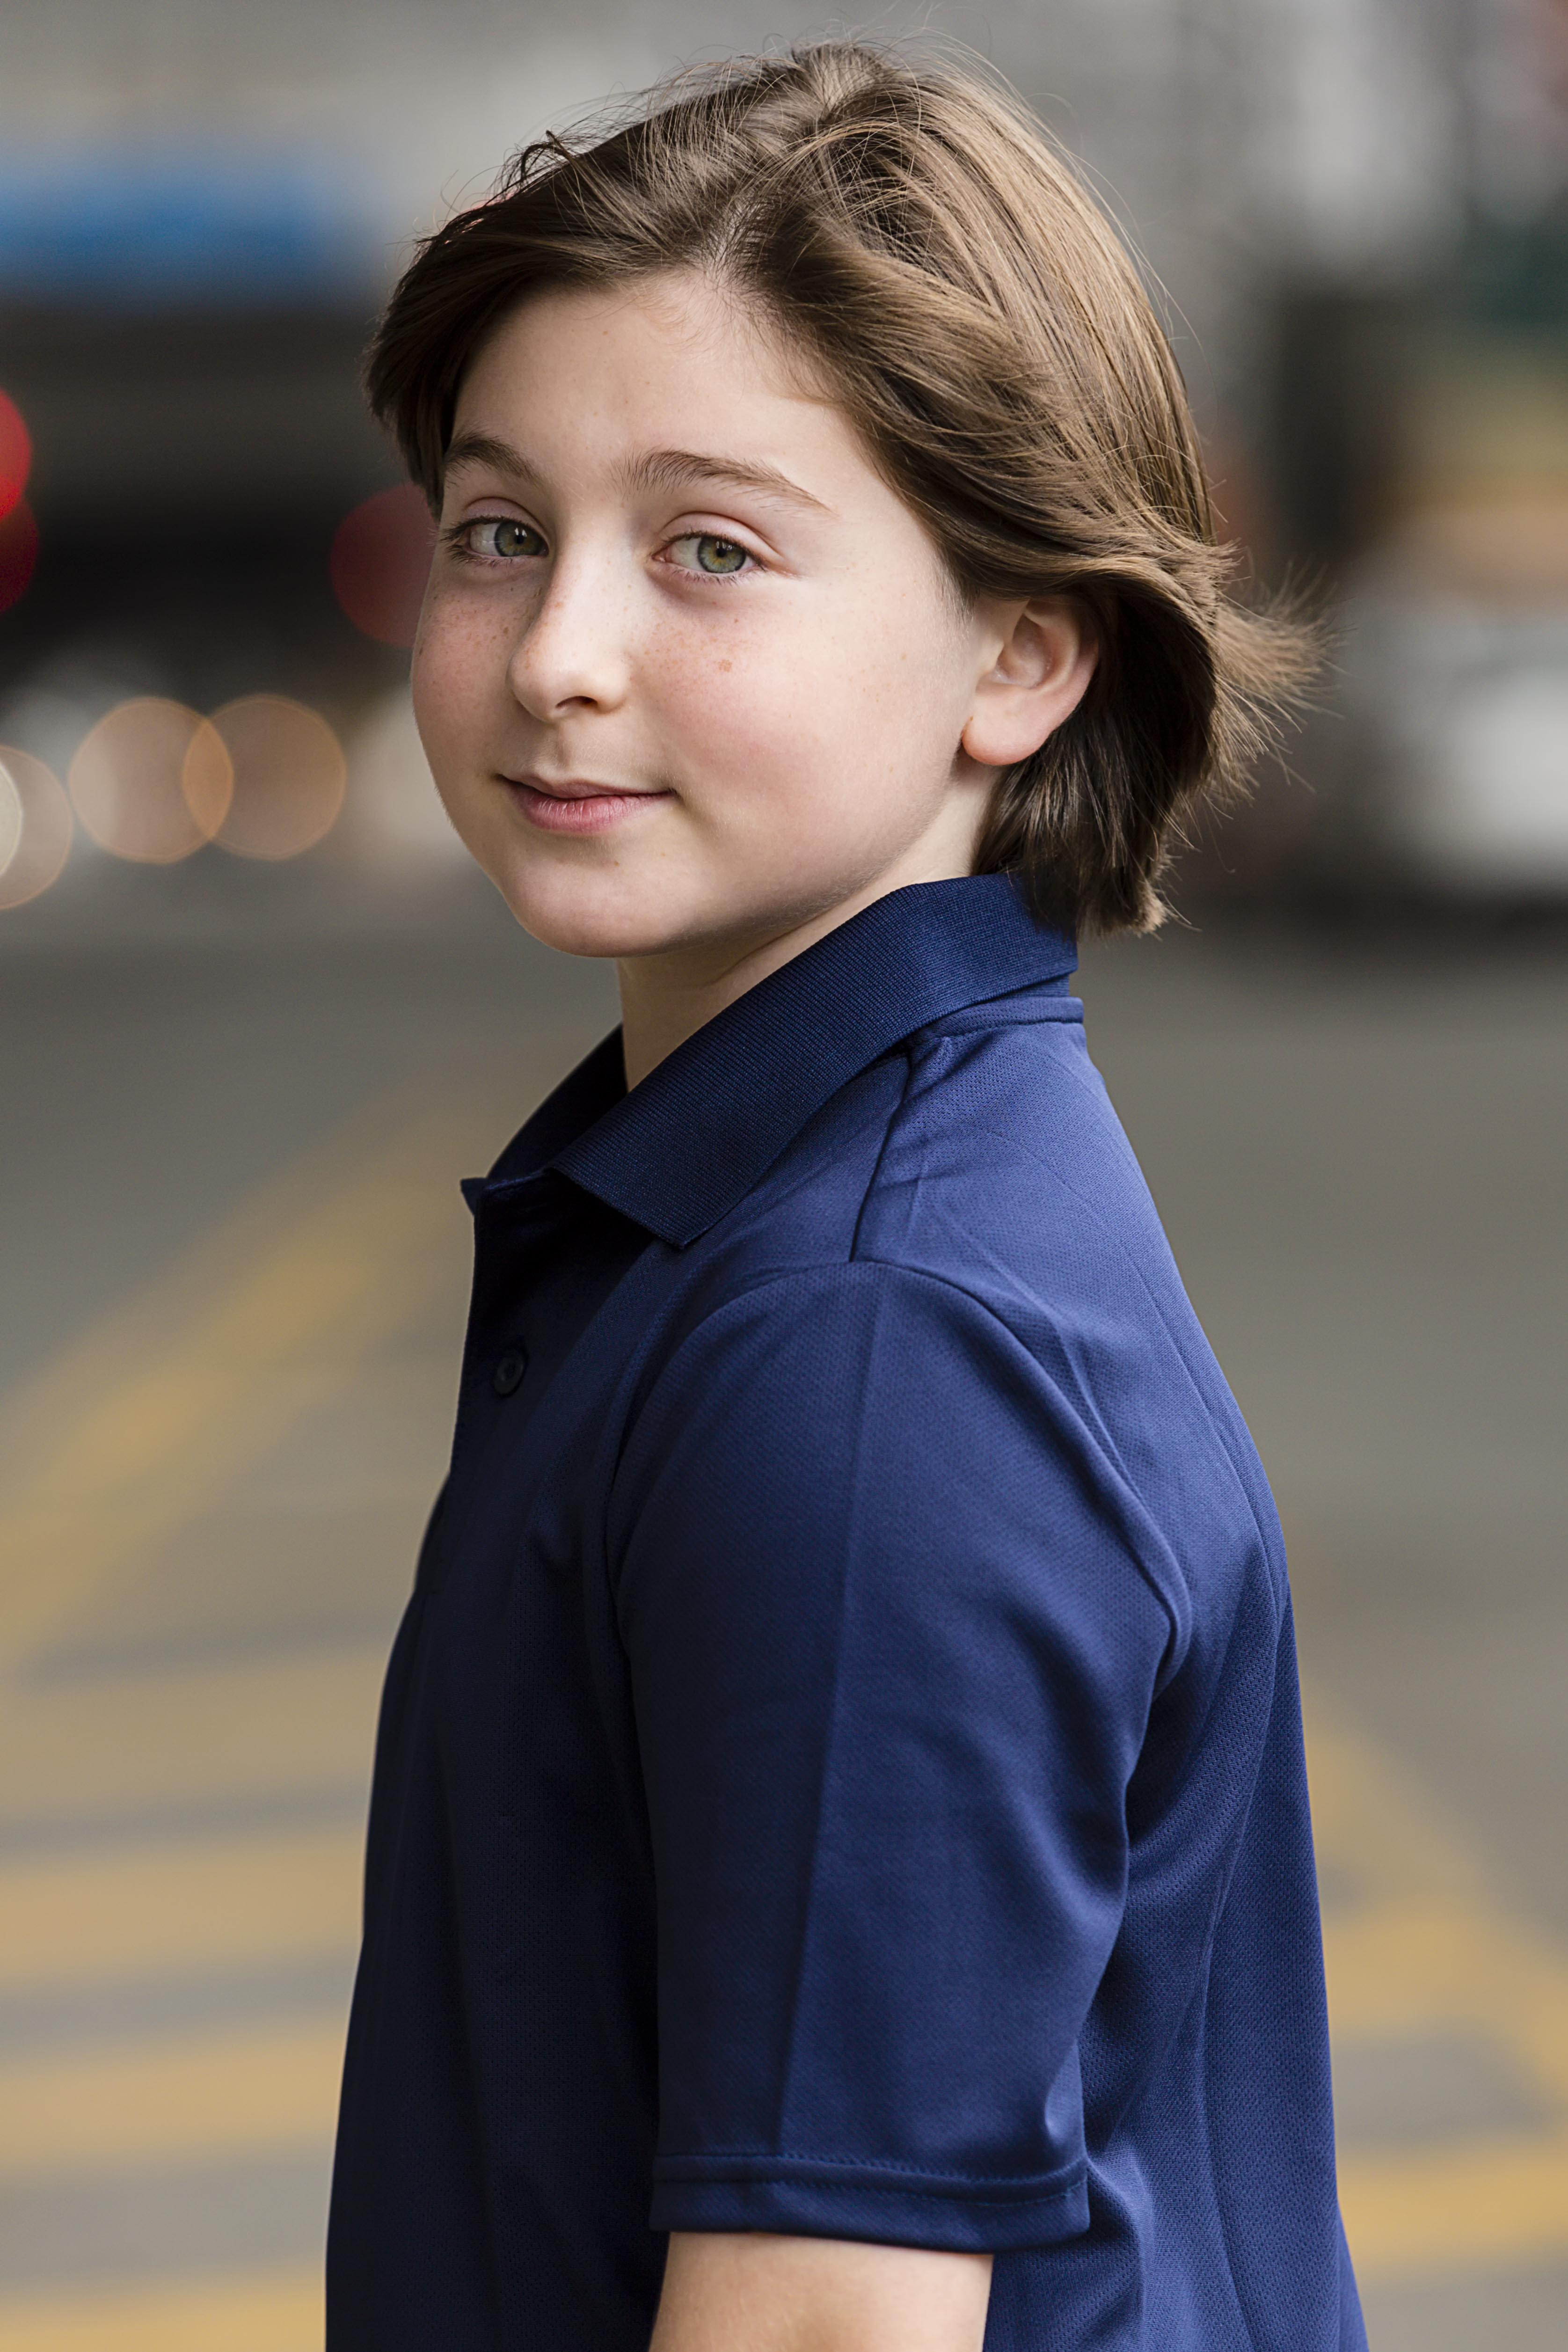 child actor open expression